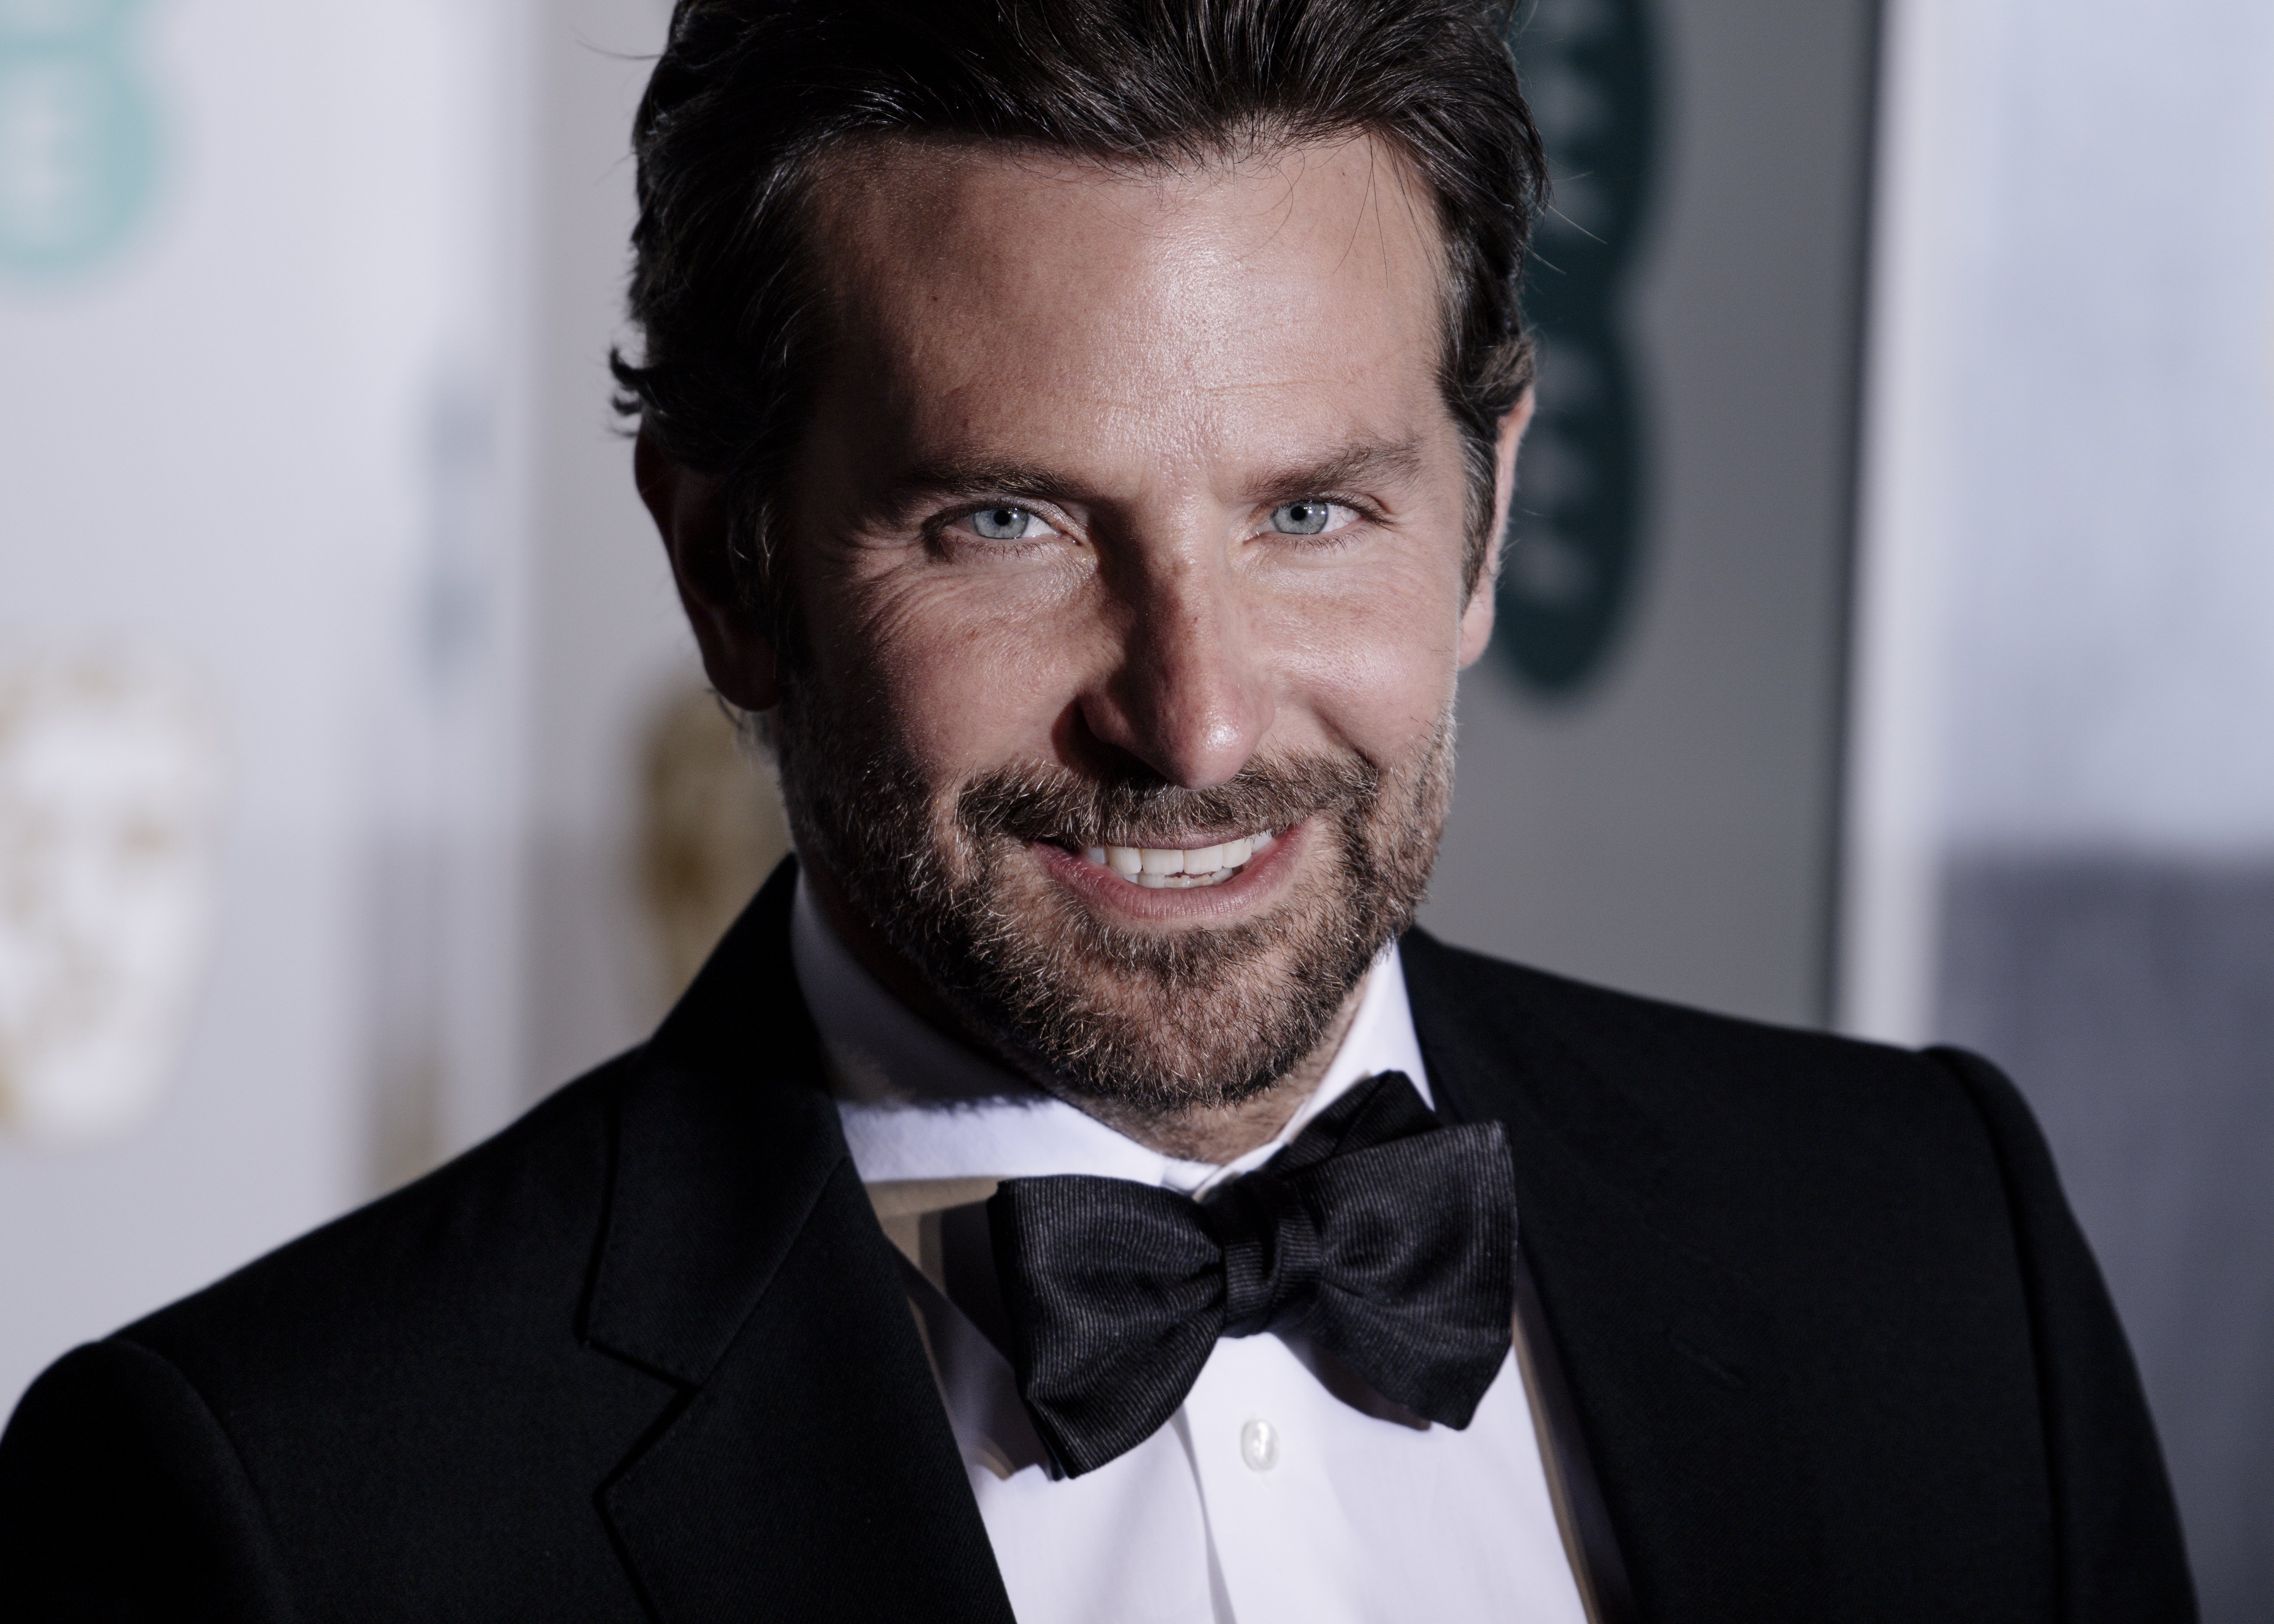 Bradley Cooper attends the EE British Academy Film Awards at Royal Albert Hall on February 10, 2019, in London, England. | Source: Getty Images.